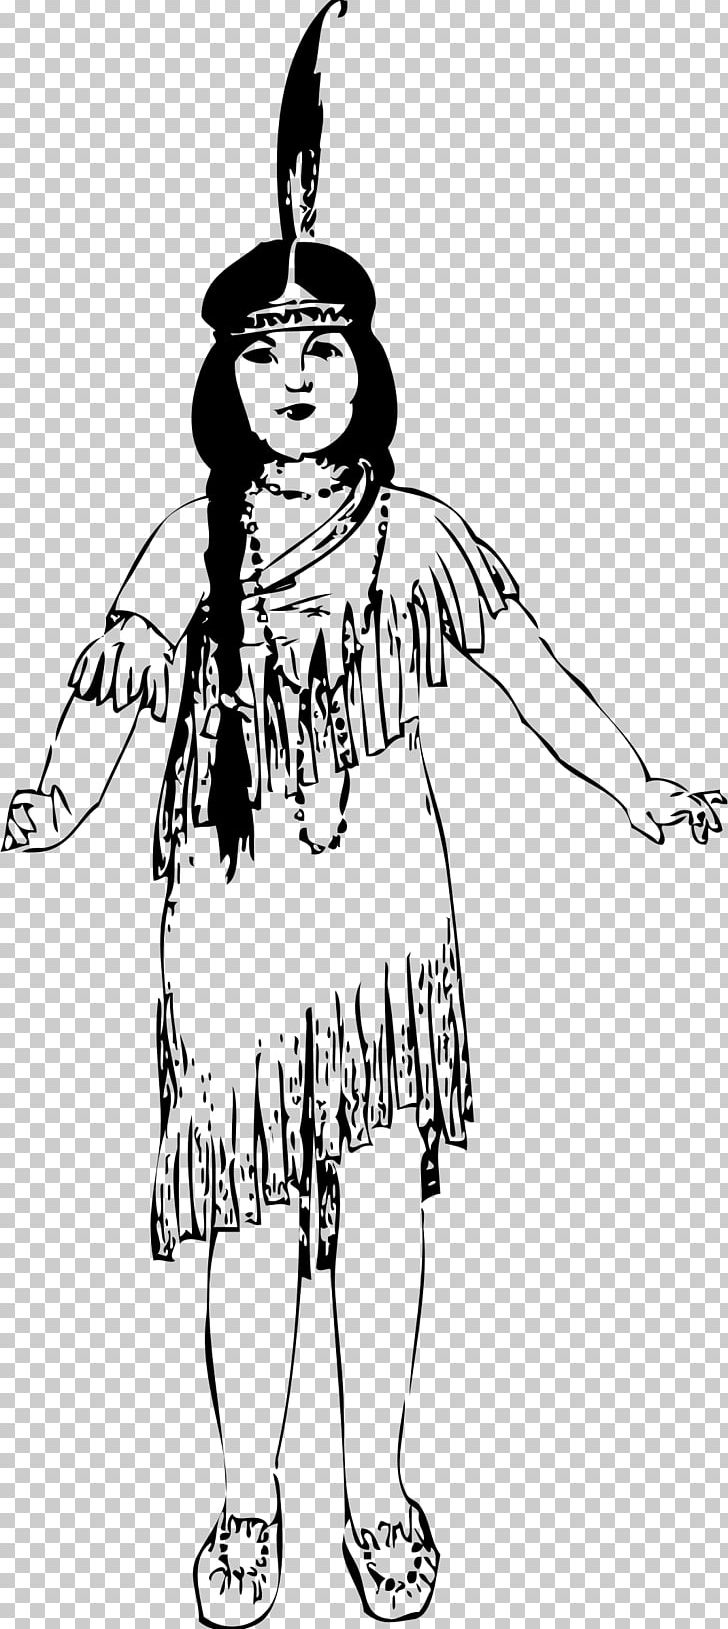 Native Americans In The United States PNG, Clipart, Bird, Black, Ethnic Group, Fashion Illustration, Fictional Character Free PNG Download